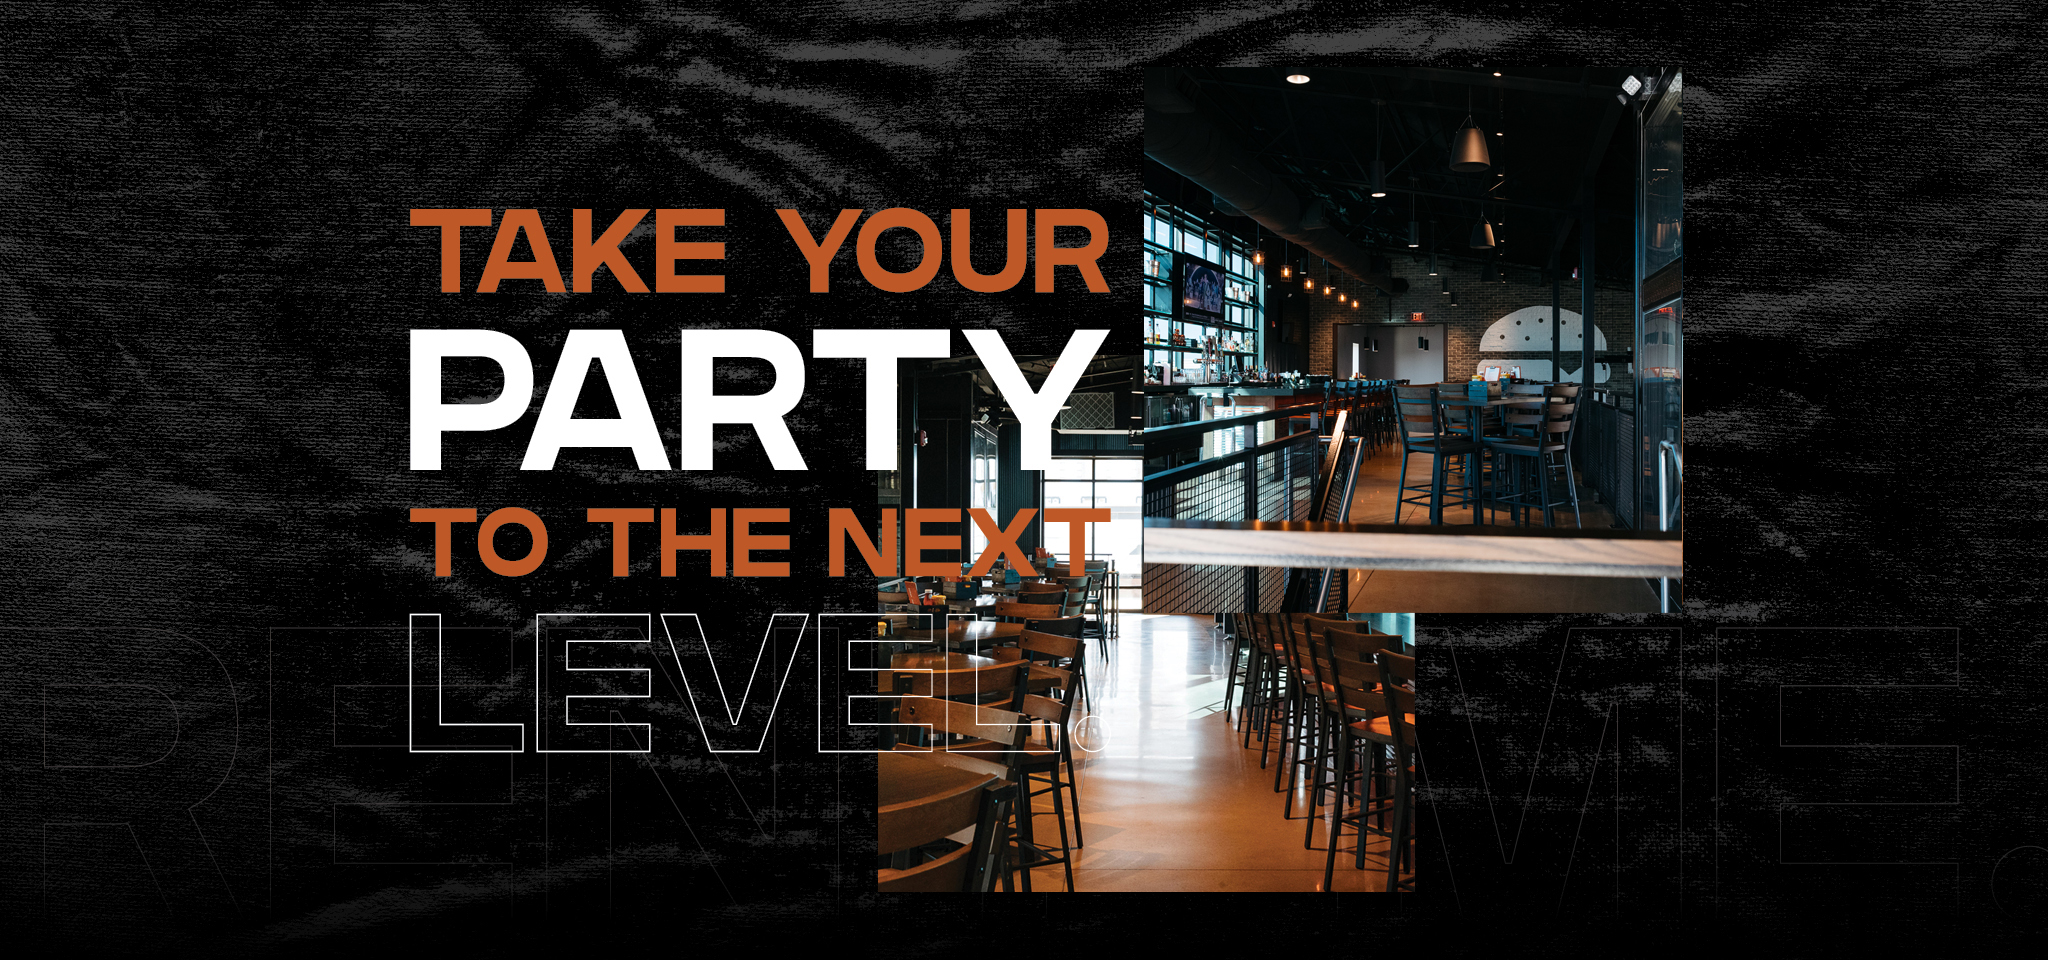 Take your party to the next level